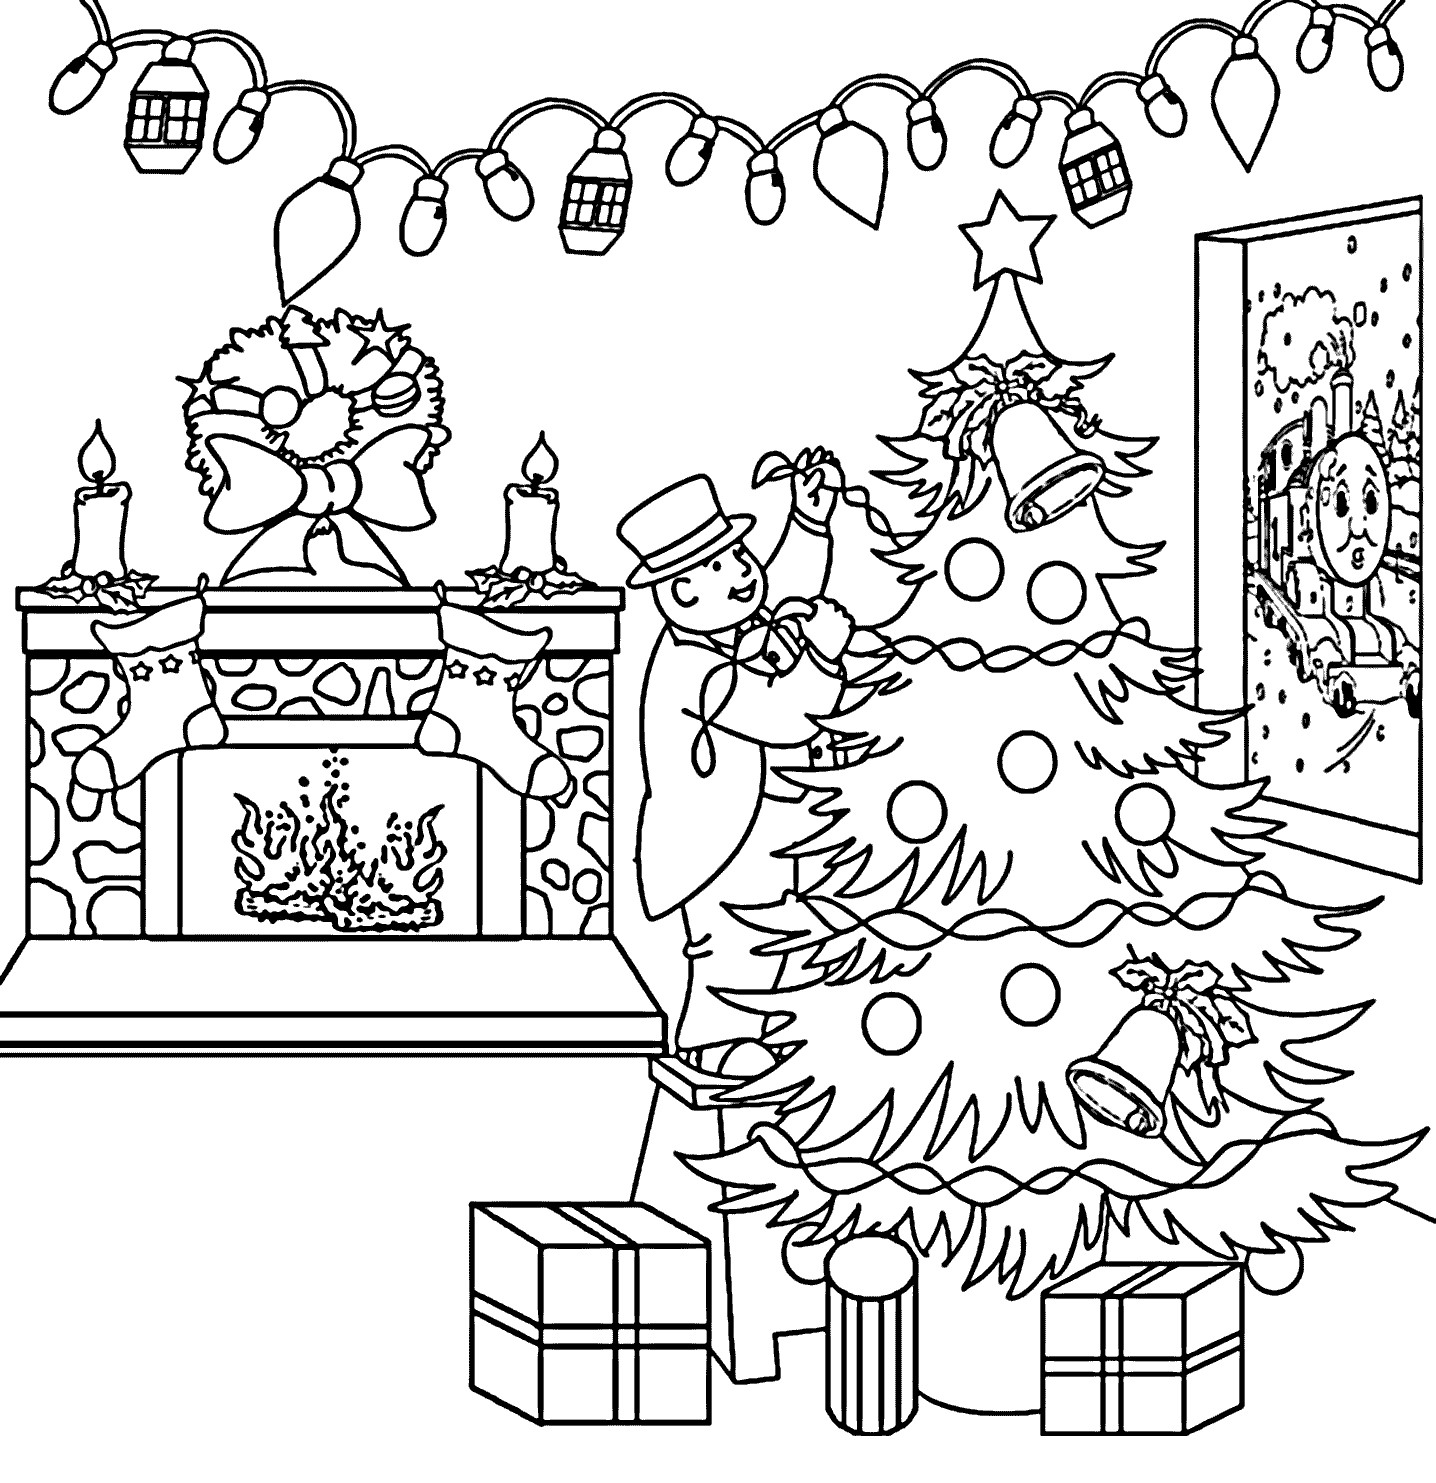 Printable Coloring Pages Christmas
 Christmas Coloring Pages For Adults To Print Free